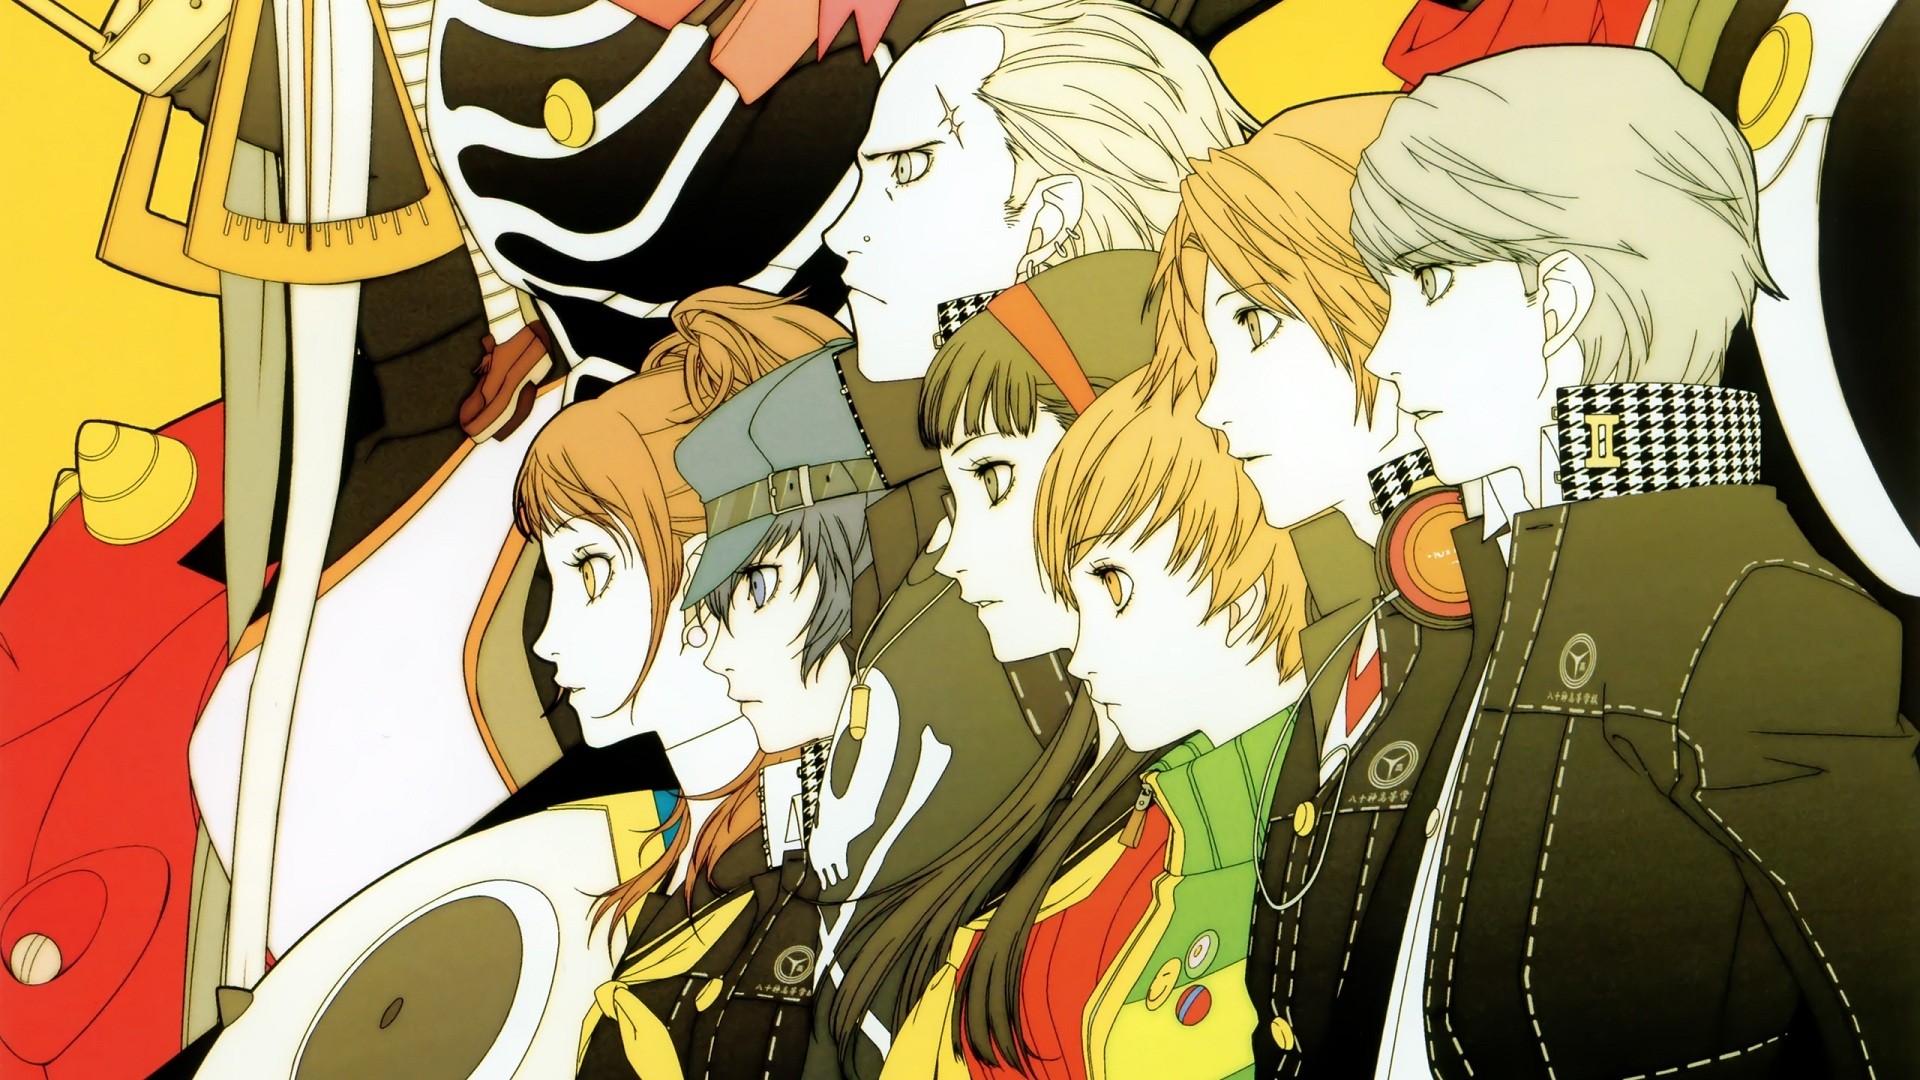 The cast of Persona 4